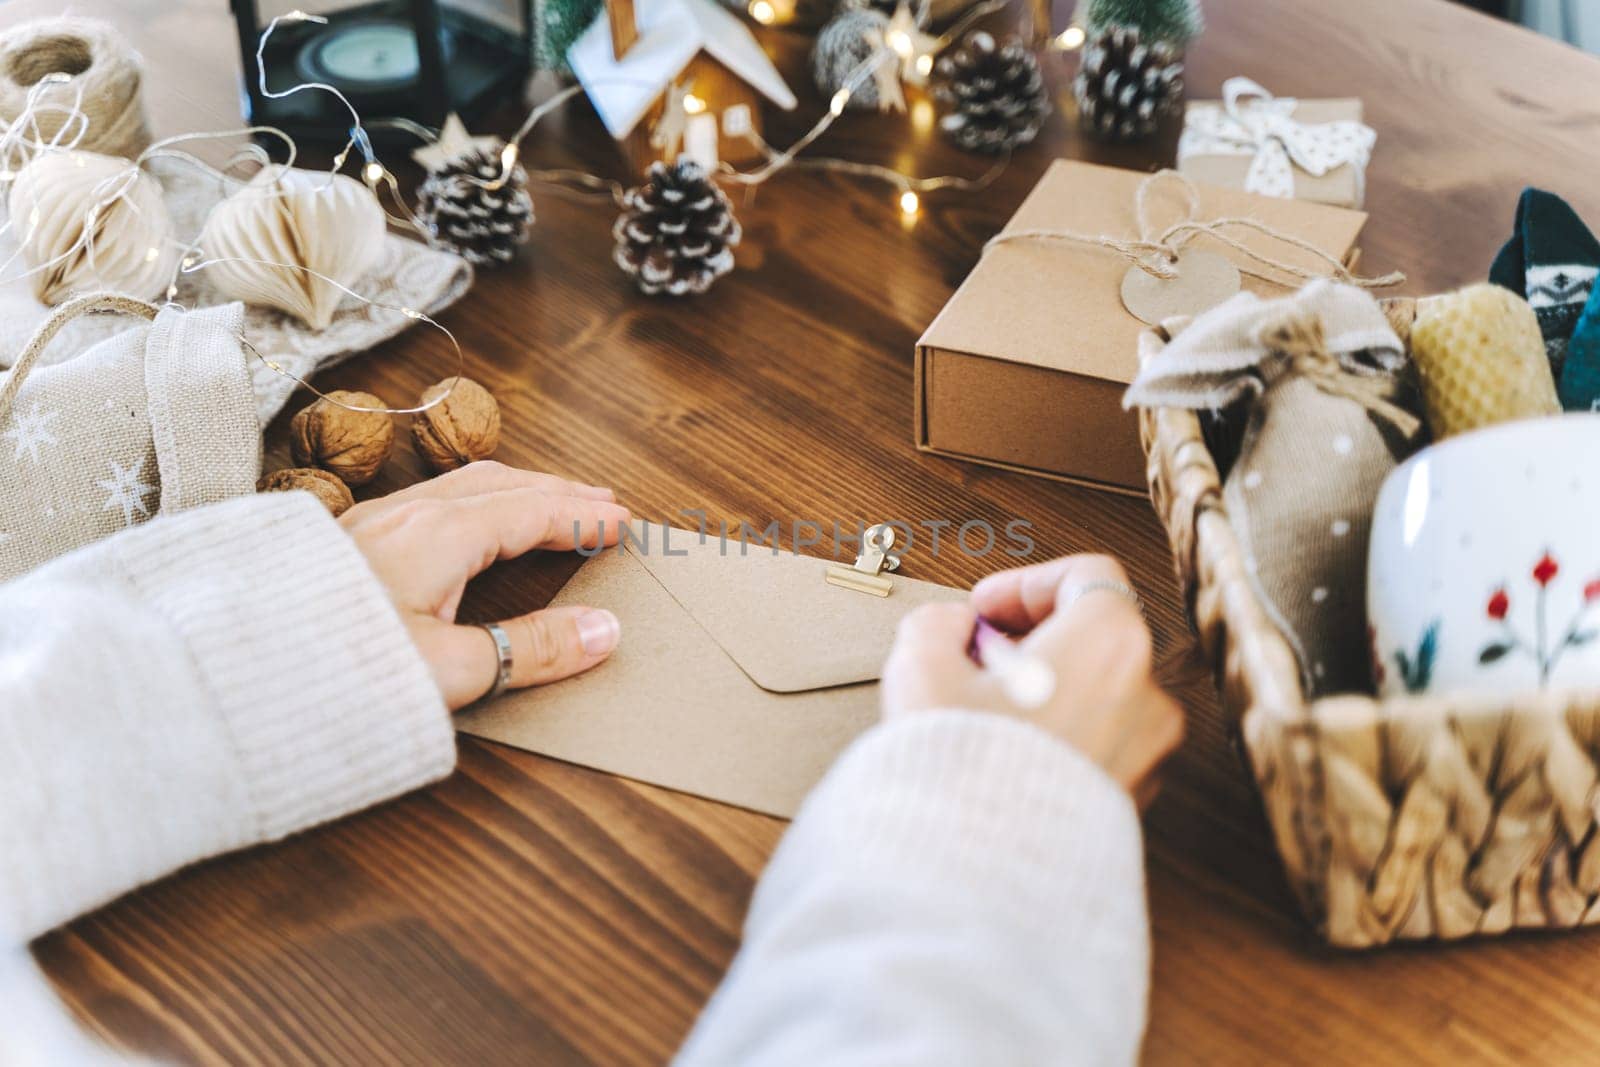 Woman s hands wrapping Christmas gift envelope, close up. Unprepared presents on white table with decor elements and items Christmas or New year DIY packing Concept.